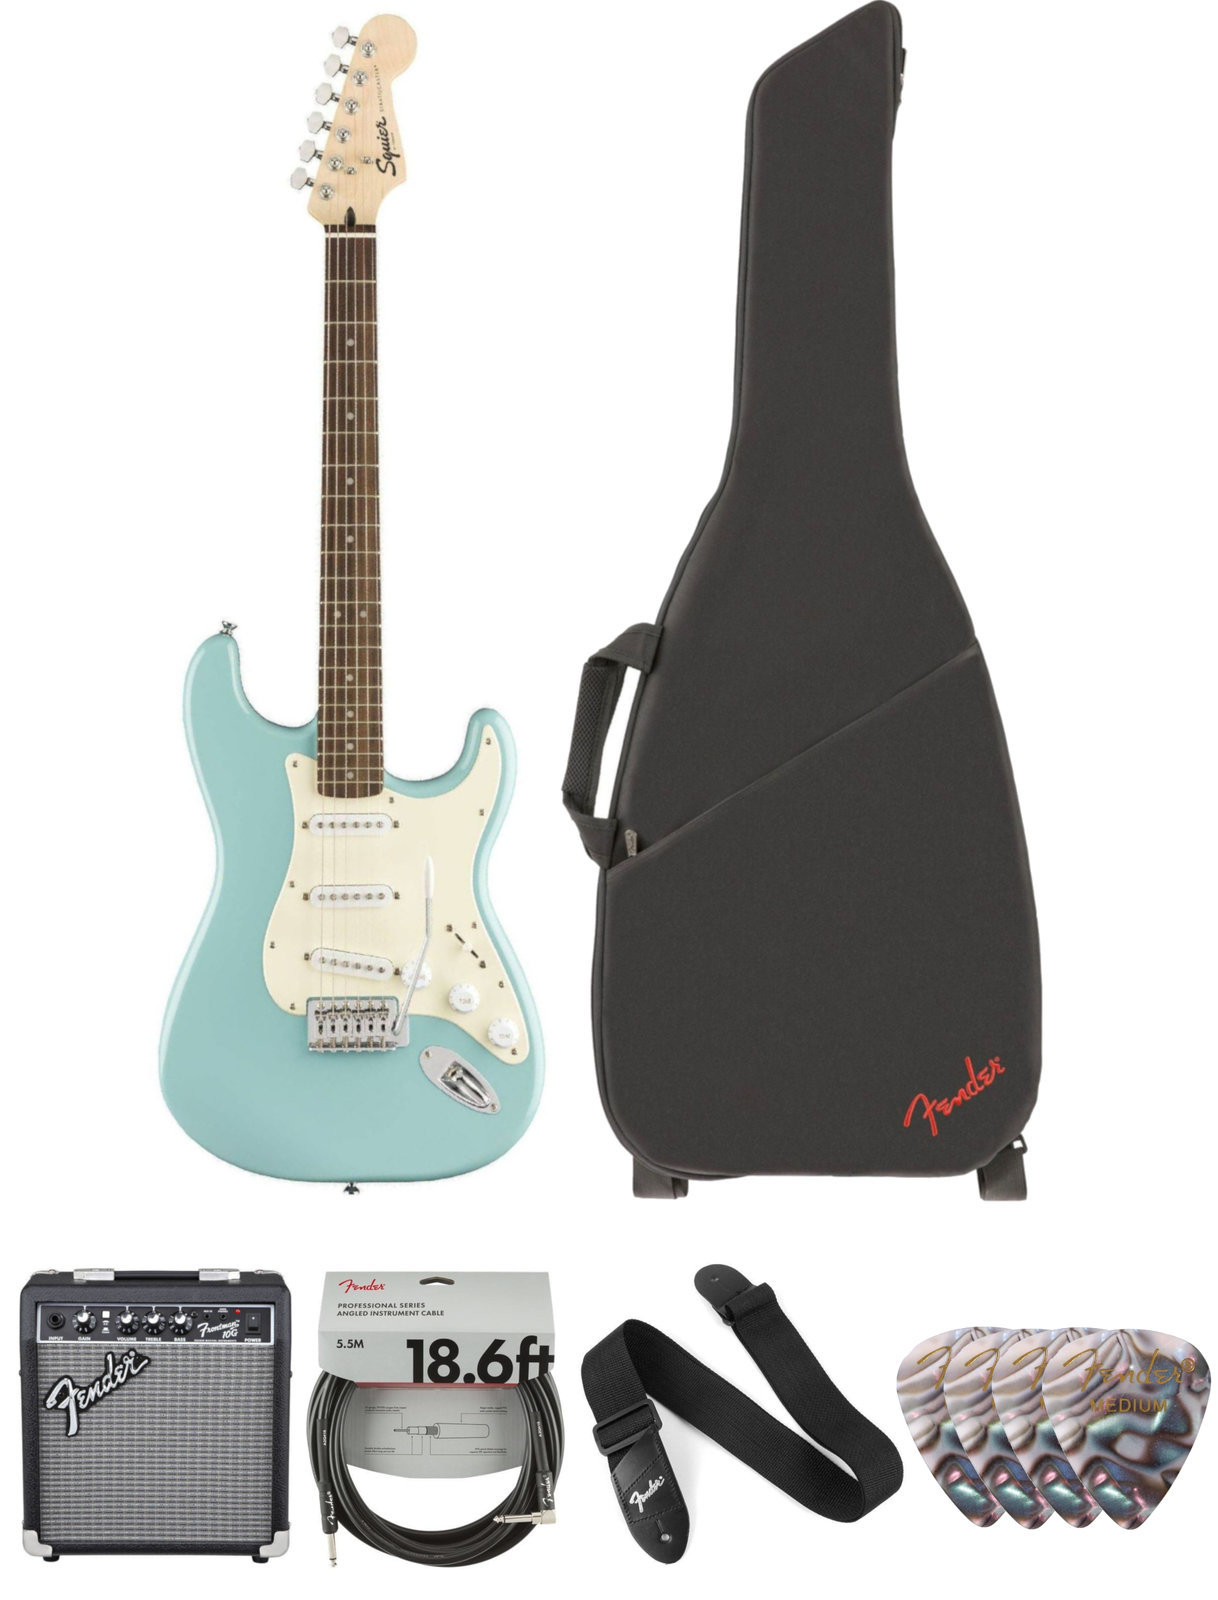 Chitarra Elettrica Fender Squier Bullet Stratocaster Tremolo IL Tropical Turquoise Deluxe SET Tropical Turquoise